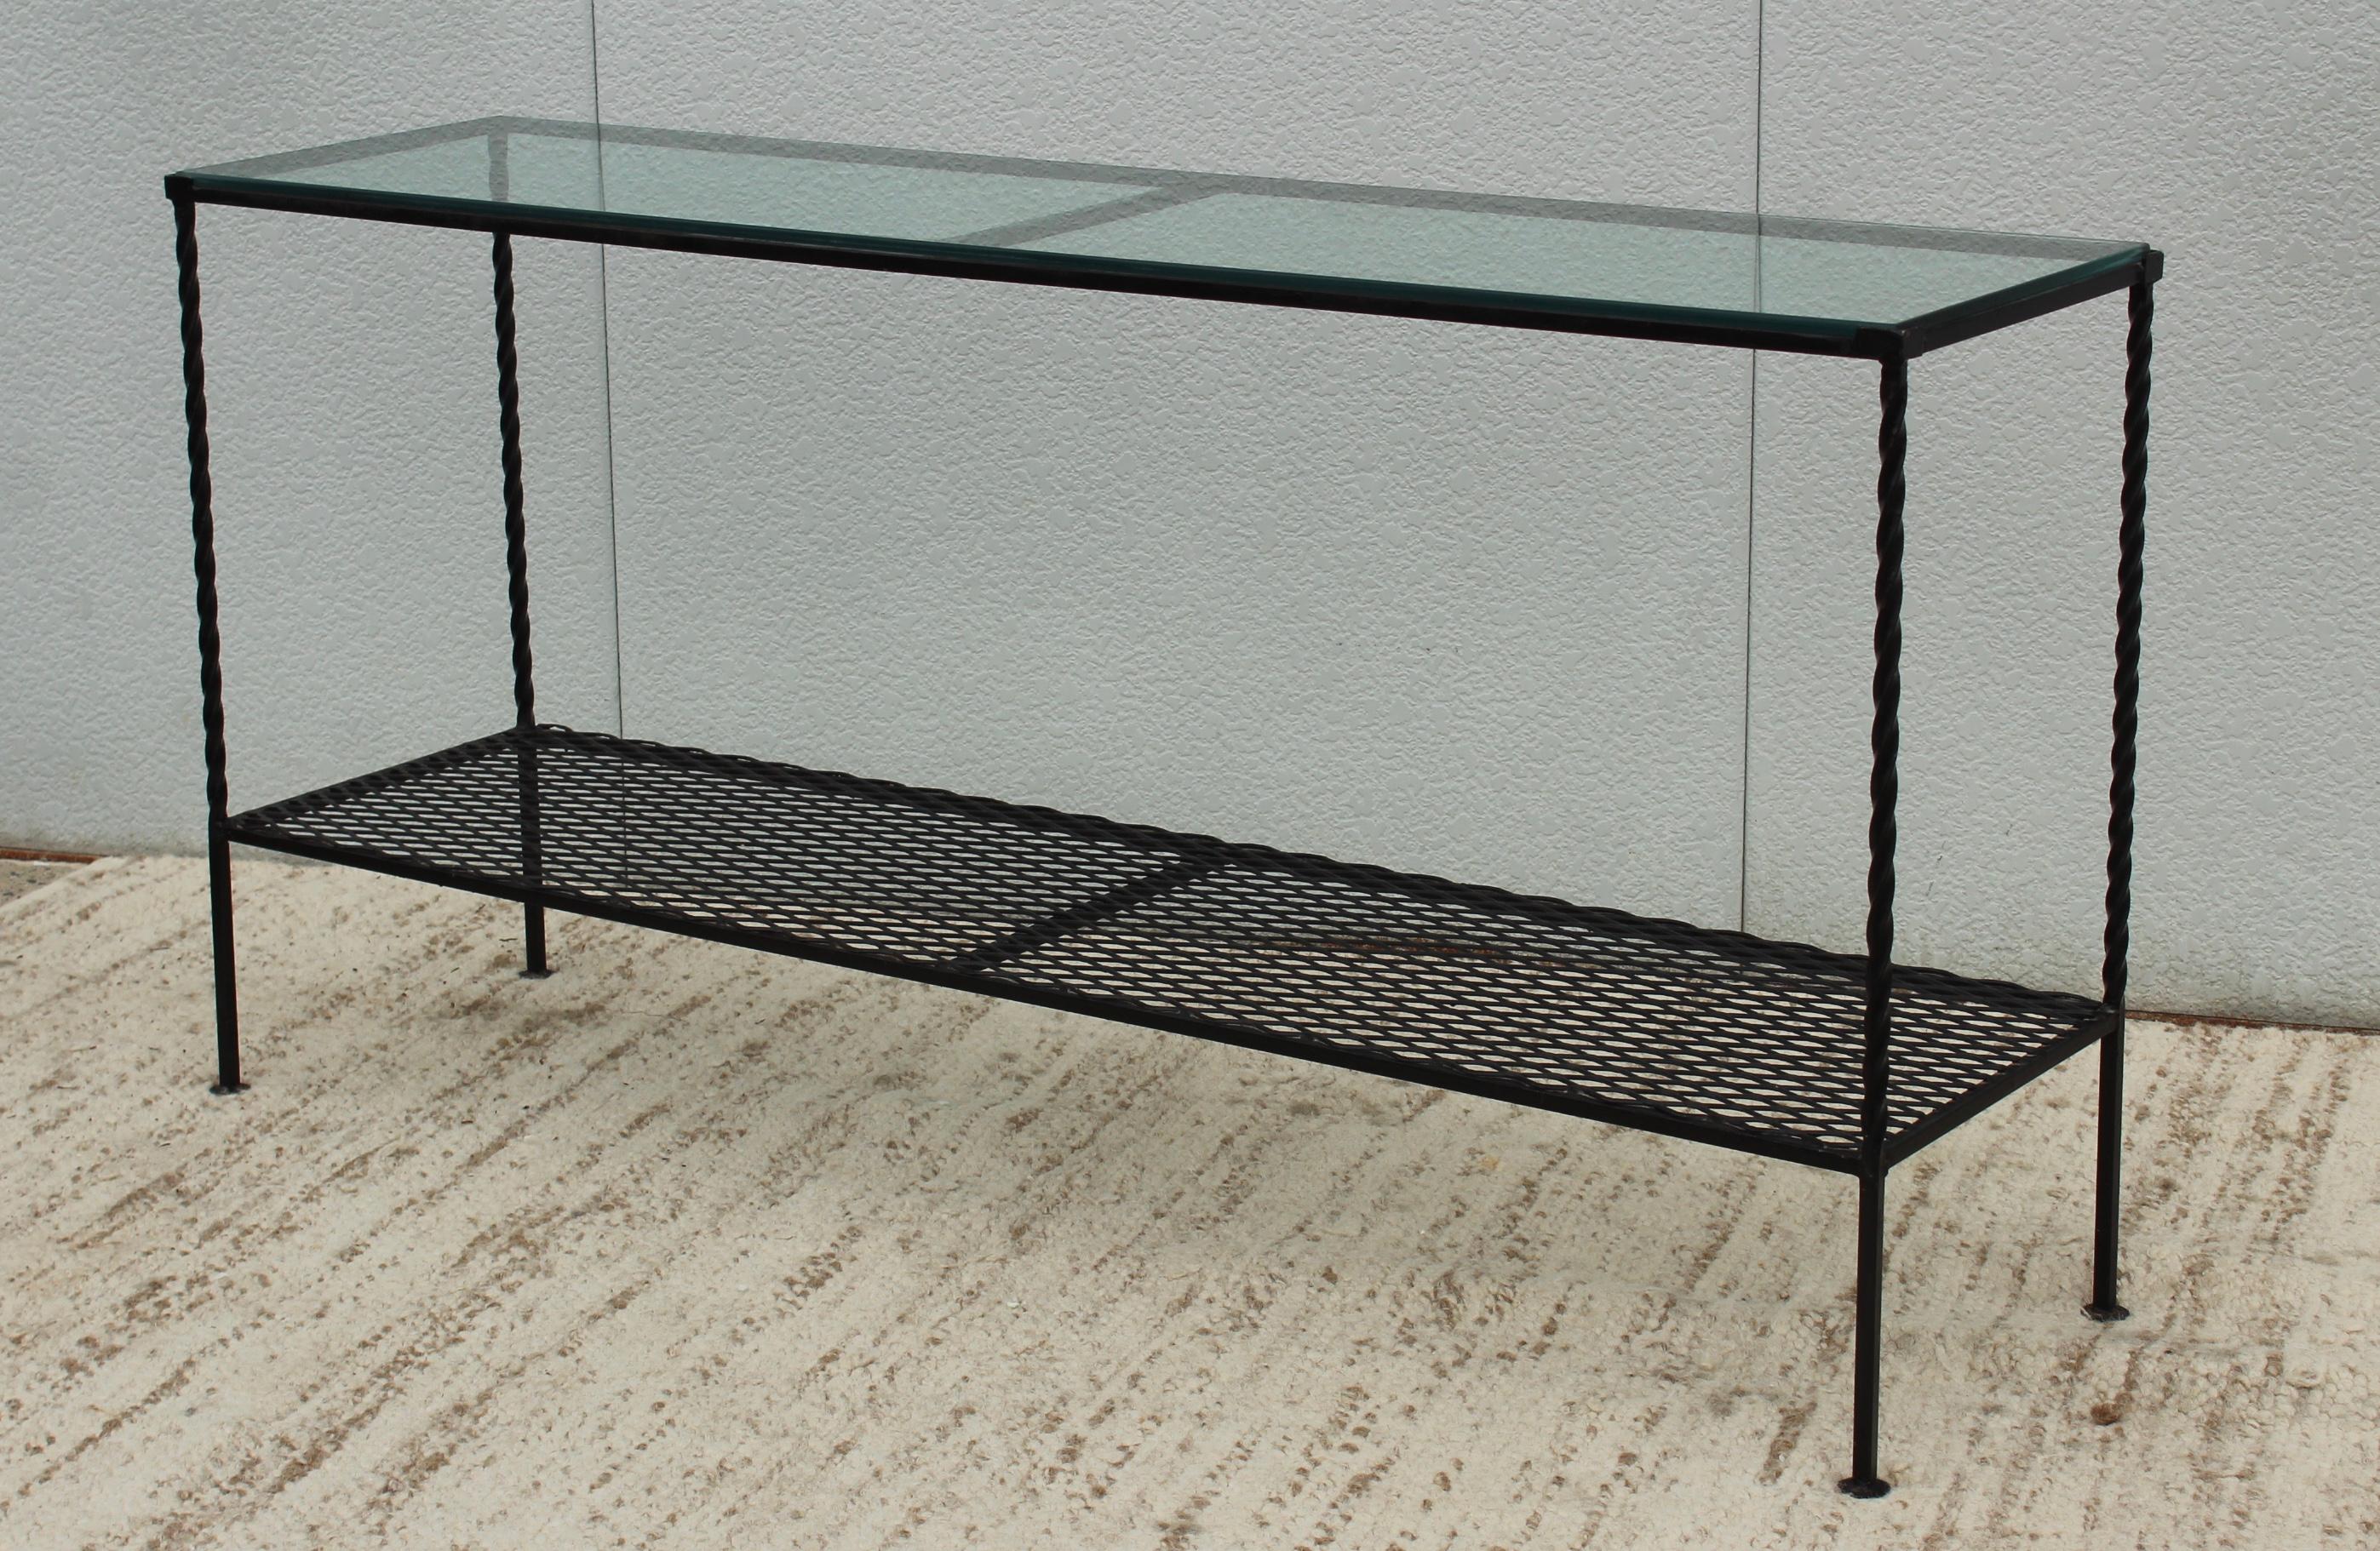 1960s Mid-Century Modern custom made two-tier wrought iron console with glass top.